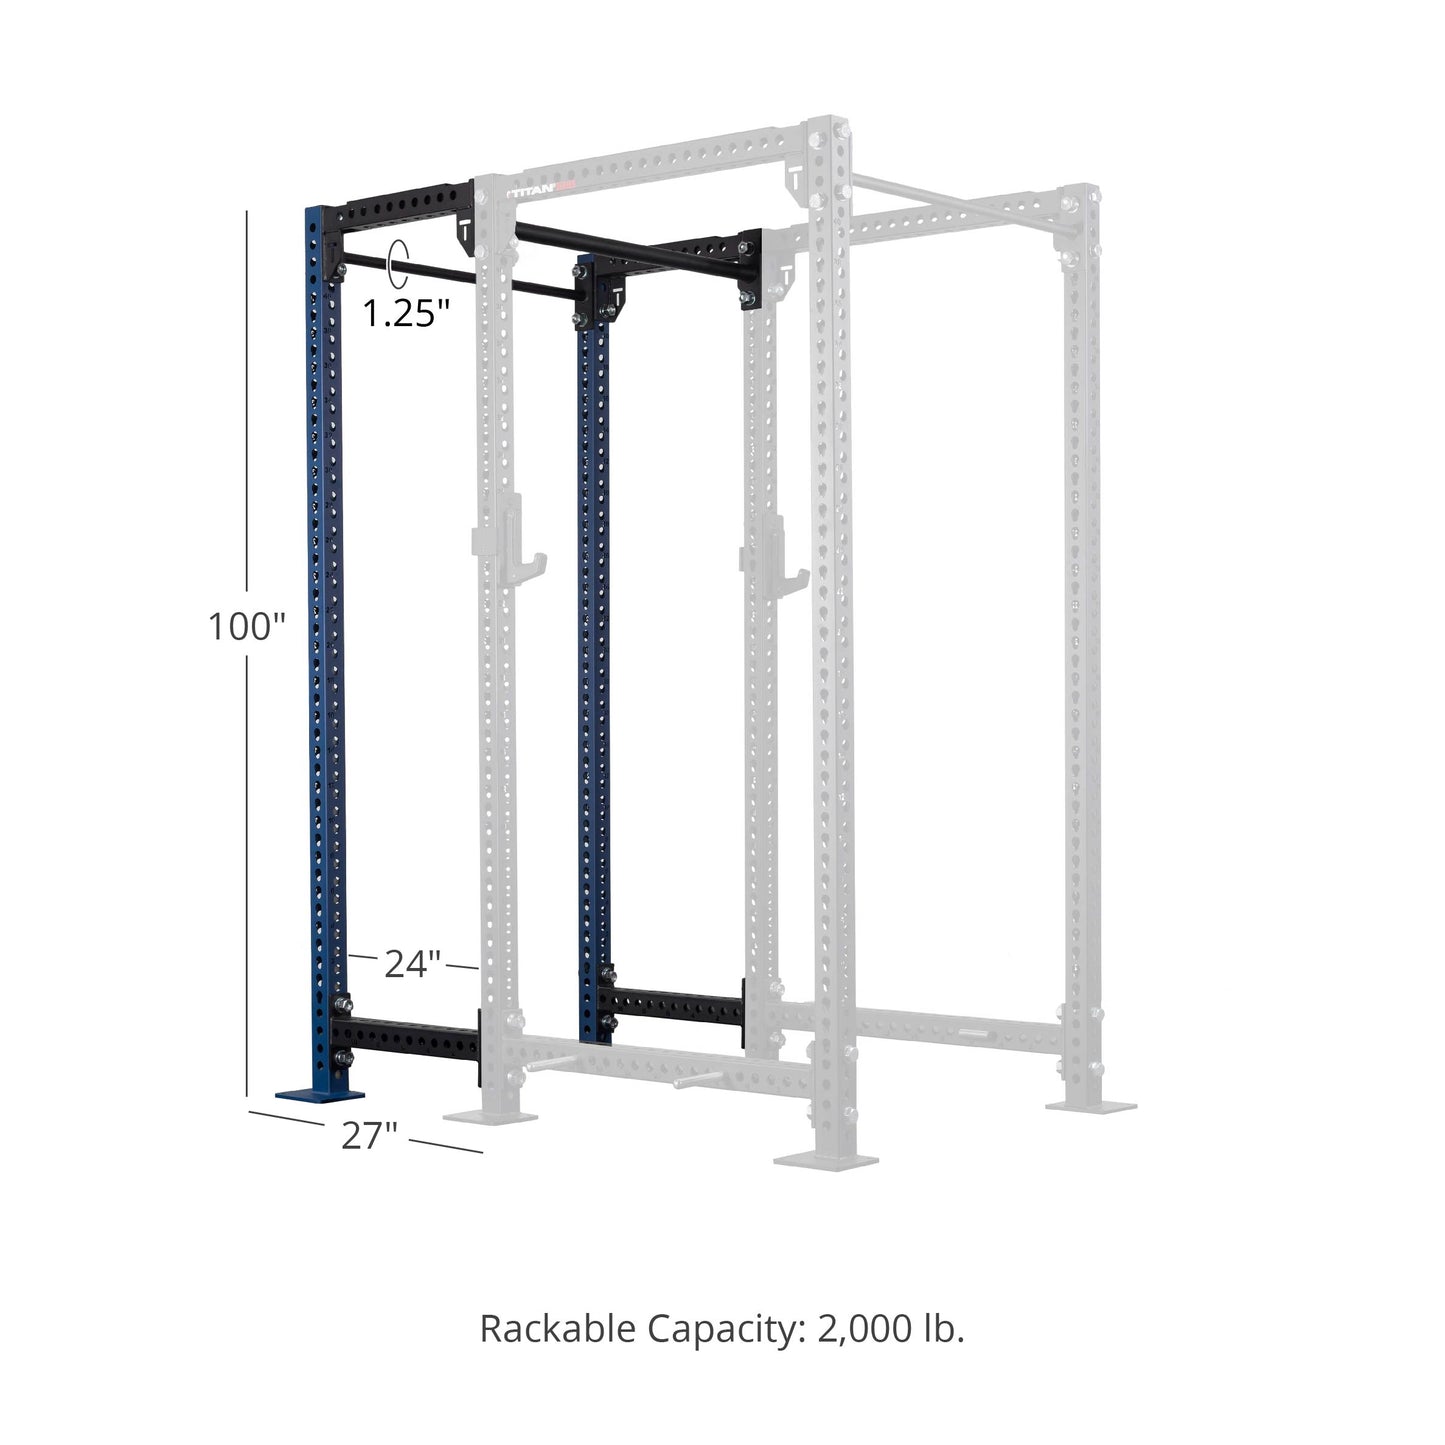 TITAN Series 24" Extension Kit - Extension Color: Navy - Extension Height: 100" - Crossmember: 1.25" Pull-Up Bar | Navy / 100" / 1.25" Pull-Up Bar - view 69